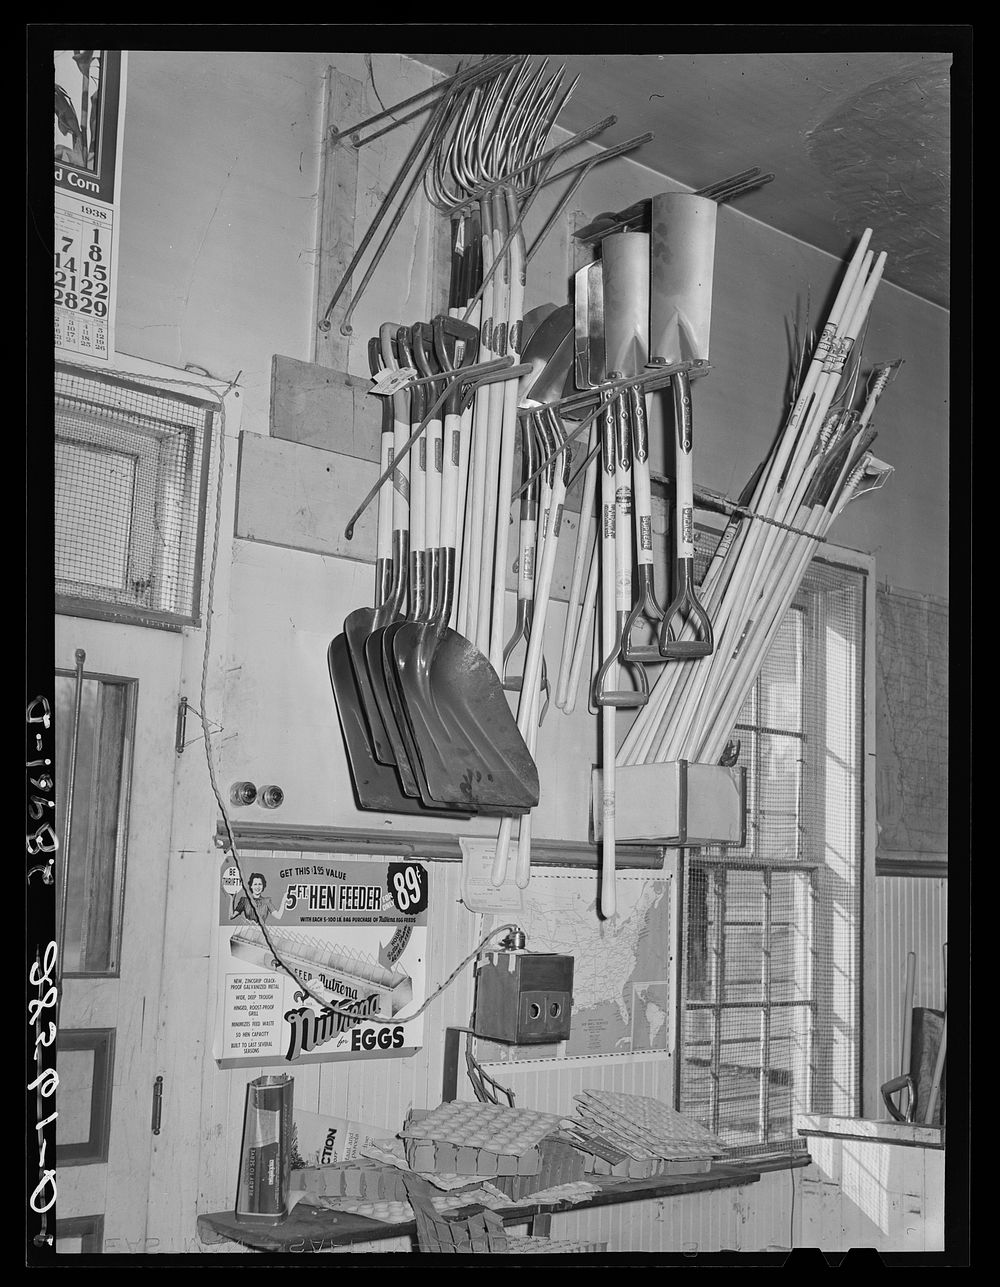 Farm implements and egg candler. General store. Lamoille, Iowa. Sourced from the Library of Congress.